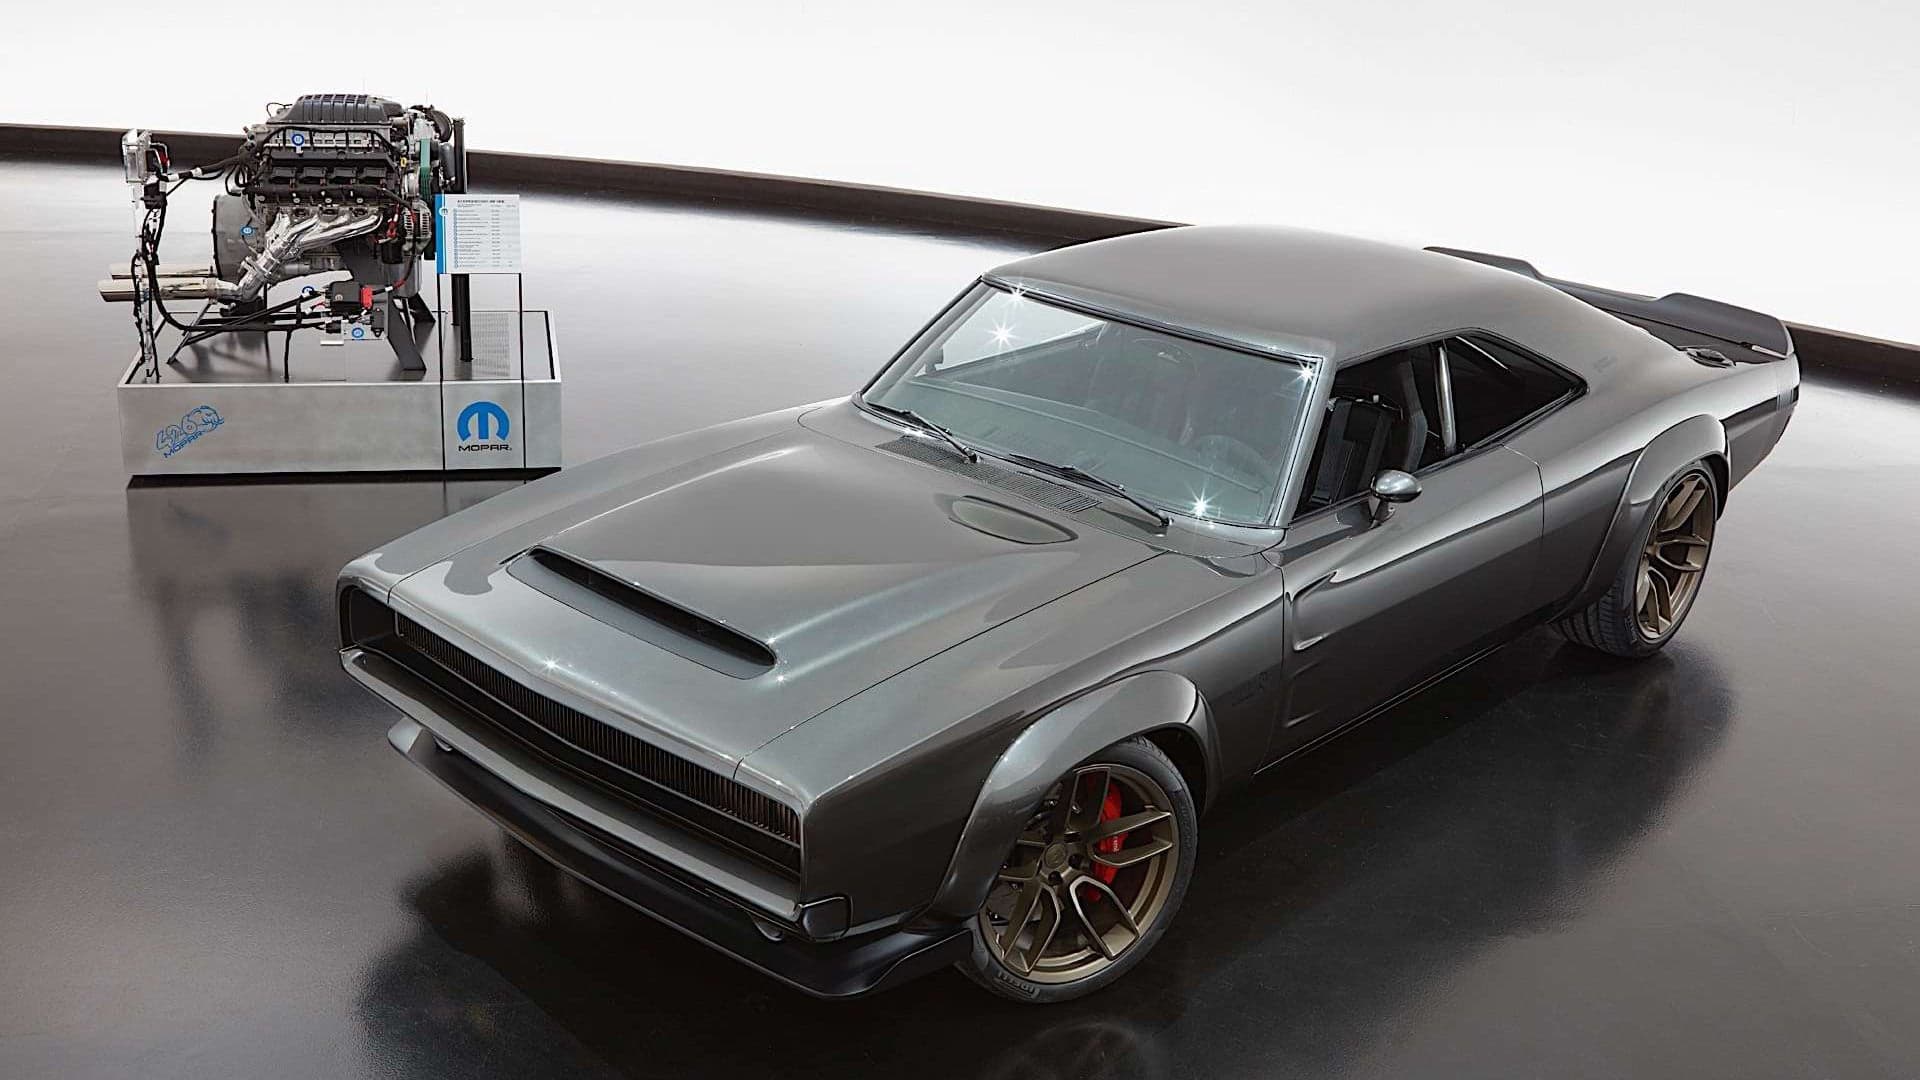 Hellcats of SEMA: Mopar Drops 1,000-HP ‘Hellephant’ Crate Engine, ‘Super Charger’ Concept to Go With It